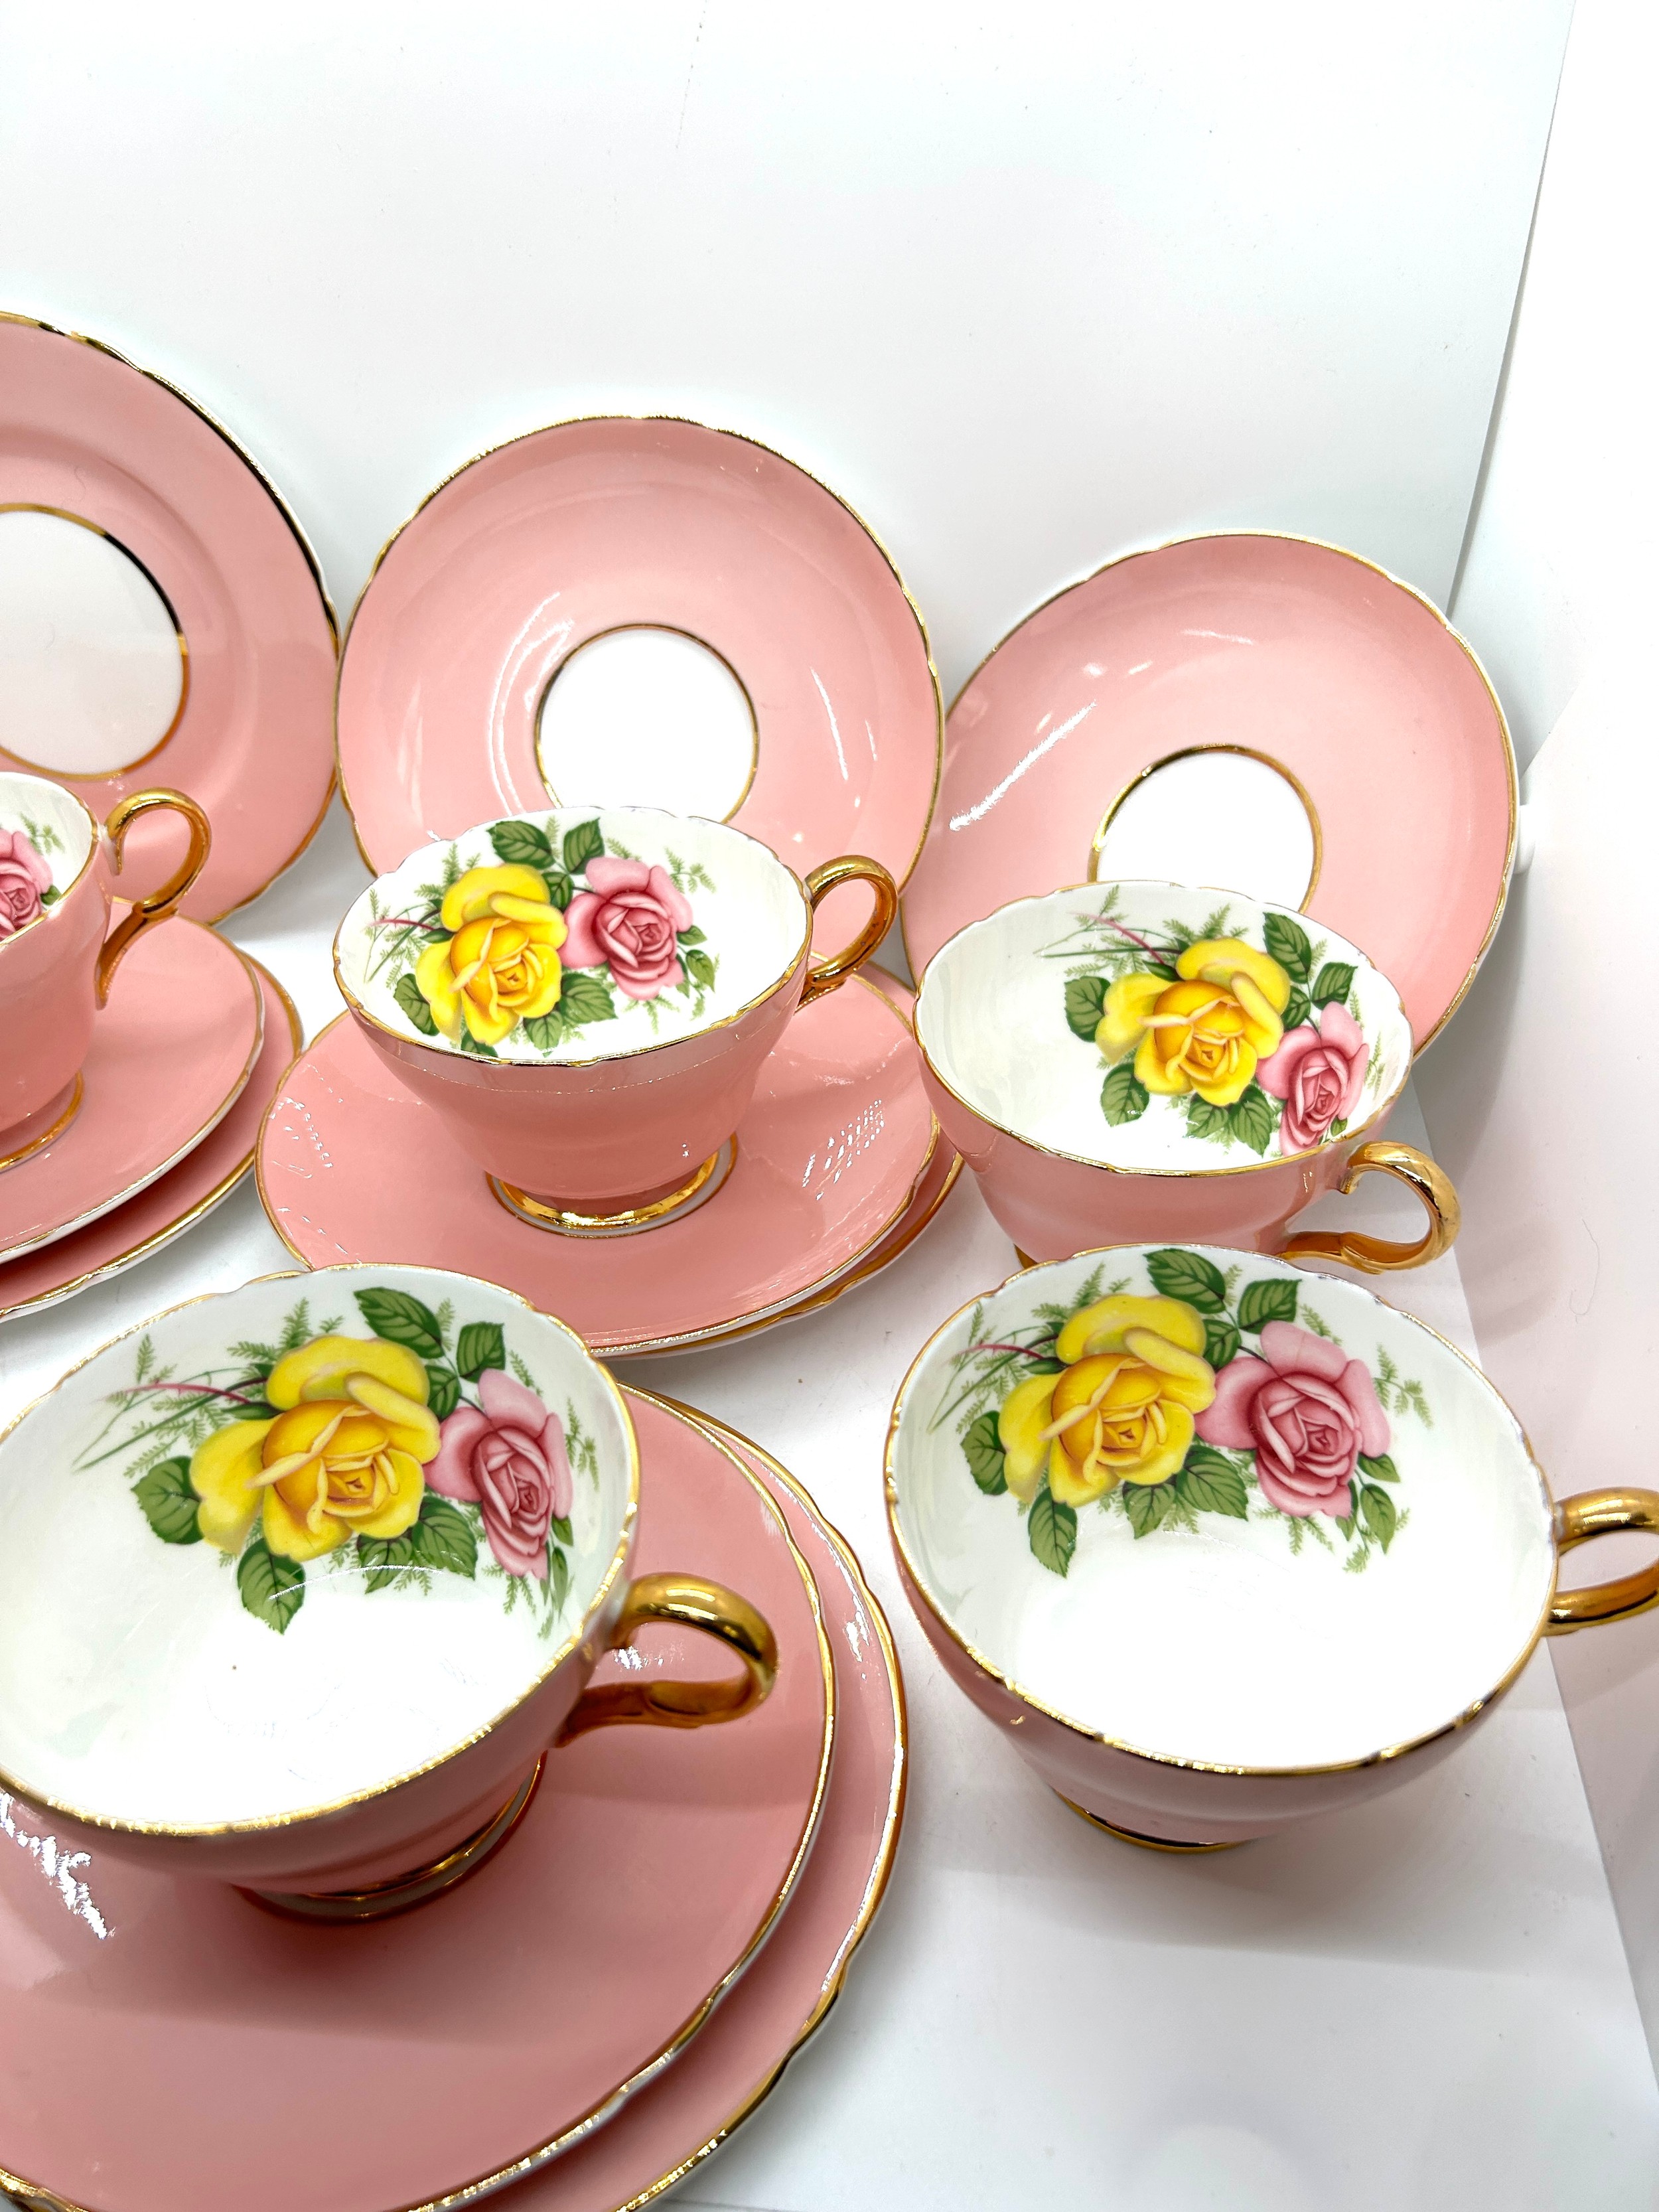 Five Shelley 2nd's trio sets along with extra cup and saucer - Image 2 of 5